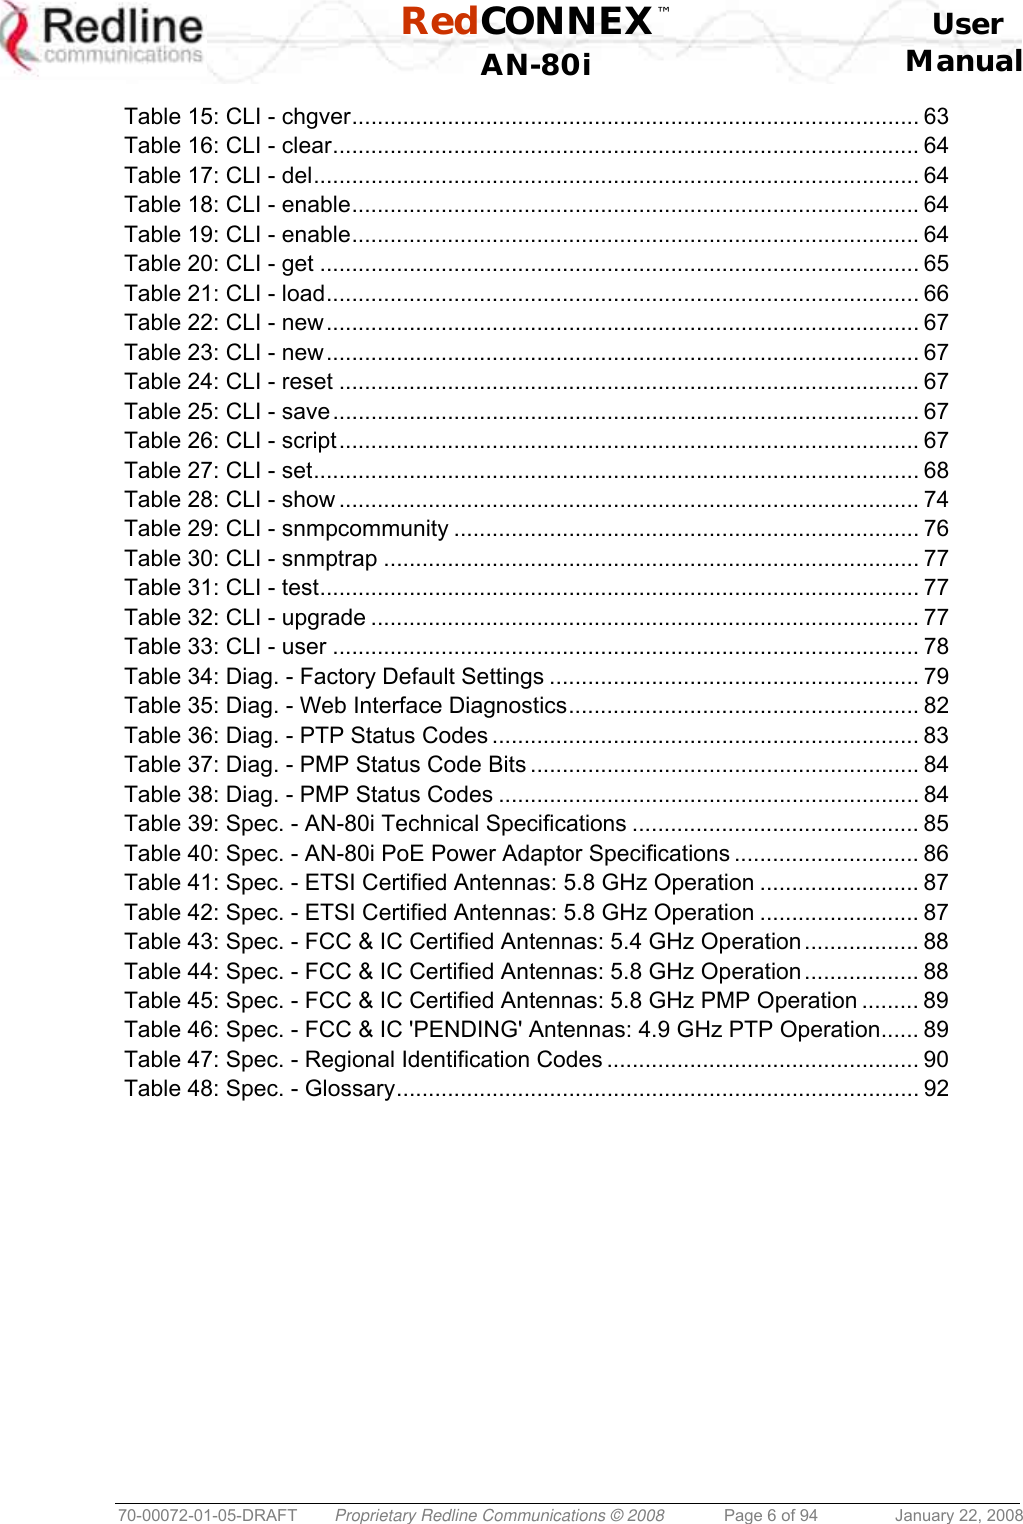  RedCONNEX™    User  AN-80i Manual  70-00072-01-05-DRAFT  Proprietary Redline Communications © 2008  Page 6 of 94  January 22, 2008 Table 15: CLI - chgver......................................................................................... 63 Table 16: CLI - clear............................................................................................ 64 Table 17: CLI - del............................................................................................... 64 Table 18: CLI - enable......................................................................................... 64 Table 19: CLI - enable......................................................................................... 64 Table 20: CLI - get .............................................................................................. 65 Table 21: CLI - load............................................................................................. 66 Table 22: CLI - new............................................................................................. 67 Table 23: CLI - new............................................................................................. 67 Table 24: CLI - reset ........................................................................................... 67 Table 25: CLI - save............................................................................................ 67 Table 26: CLI - script........................................................................................... 67 Table 27: CLI - set............................................................................................... 68 Table 28: CLI - show ........................................................................................... 74 Table 29: CLI - snmpcommunity ......................................................................... 76 Table 30: CLI - snmptrap .................................................................................... 77 Table 31: CLI - test.............................................................................................. 77 Table 32: CLI - upgrade ...................................................................................... 77 Table 33: CLI - user ............................................................................................ 78 Table 34: Diag. - Factory Default Settings .......................................................... 79 Table 35: Diag. - Web Interface Diagnostics....................................................... 82 Table 36: Diag. - PTP Status Codes ................................................................... 83 Table 37: Diag. - PMP Status Code Bits ............................................................. 84 Table 38: Diag. - PMP Status Codes .................................................................. 84 Table 39: Spec. - AN-80i Technical Specifications ............................................. 85 Table 40: Spec. - AN-80i PoE Power Adaptor Specifications ............................. 86 Table 41: Spec. - ETSI Certified Antennas: 5.8 GHz Operation ......................... 87 Table 42: Spec. - ETSI Certified Antennas: 5.8 GHz Operation ......................... 87 Table 43: Spec. - FCC &amp; IC Certified Antennas: 5.4 GHz Operation.................. 88 Table 44: Spec. - FCC &amp; IC Certified Antennas: 5.8 GHz Operation.................. 88 Table 45: Spec. - FCC &amp; IC Certified Antennas: 5.8 GHz PMP Operation ......... 89 Table 46: Spec. - FCC &amp; IC &apos;PENDING&apos; Antennas: 4.9 GHz PTP Operation...... 89 Table 47: Spec. - Regional Identification Codes ................................................. 90 Table 48: Spec. - Glossary.................................................................................. 92 